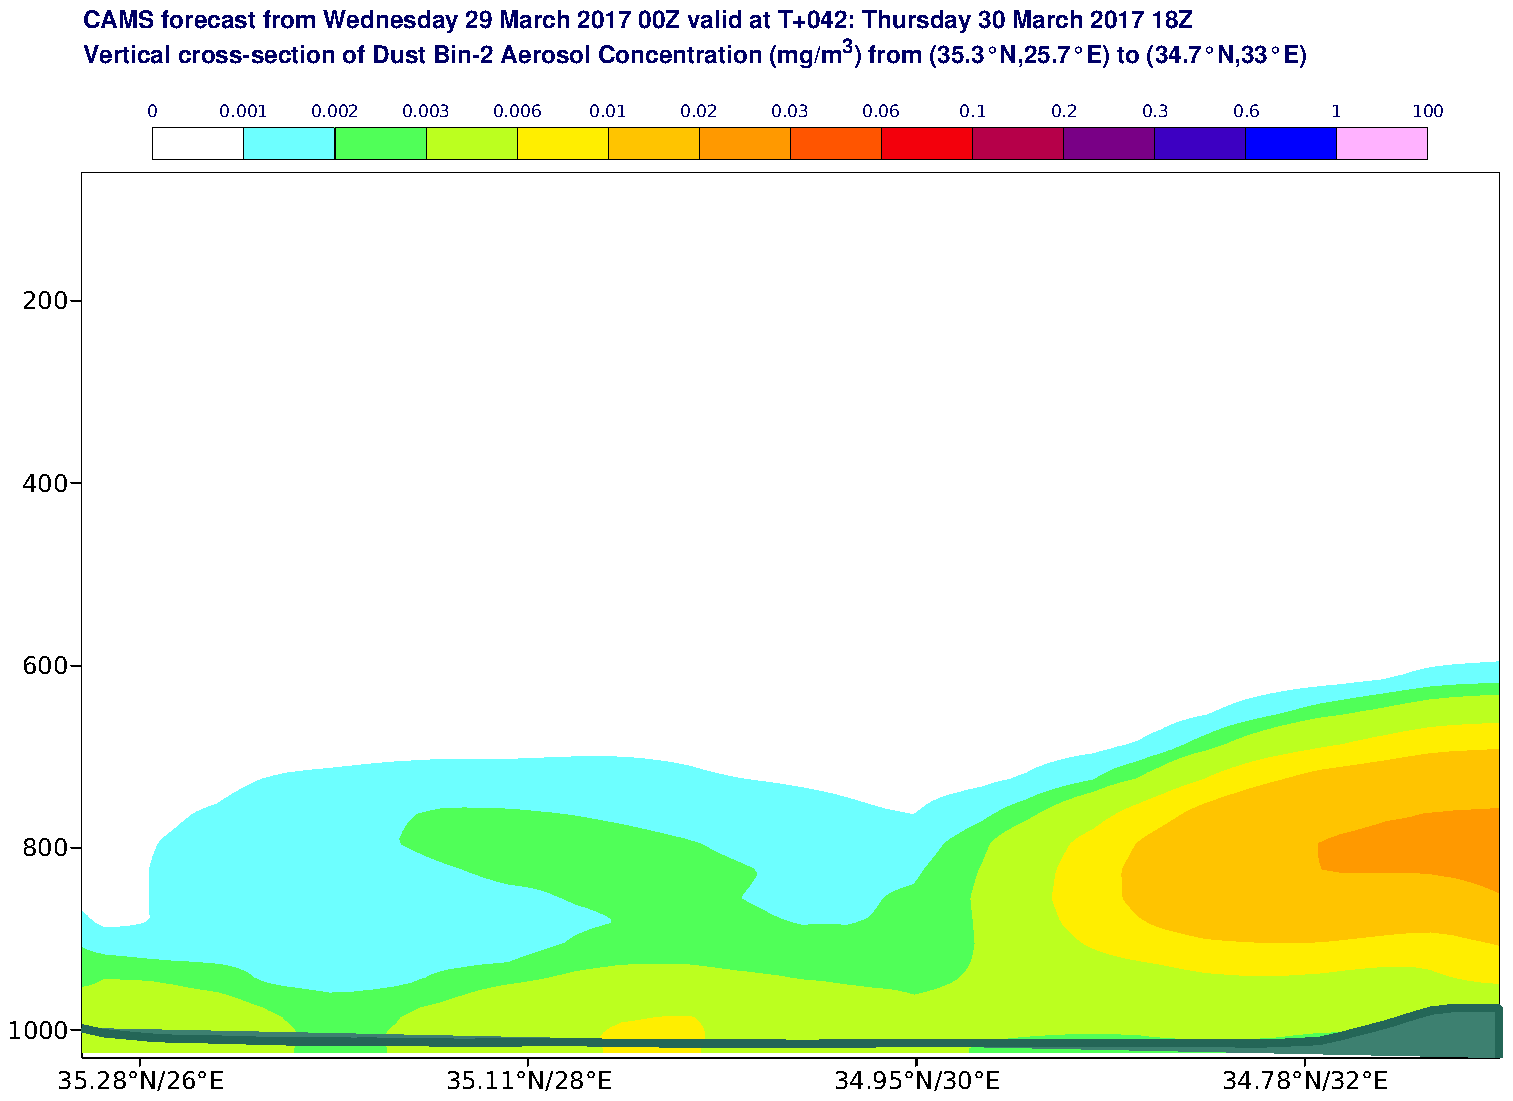 Vertical cross-section of Dust Bin-2 Aerosol Concentration (mg/m3) valid at T42 - 2017-03-30 18:00